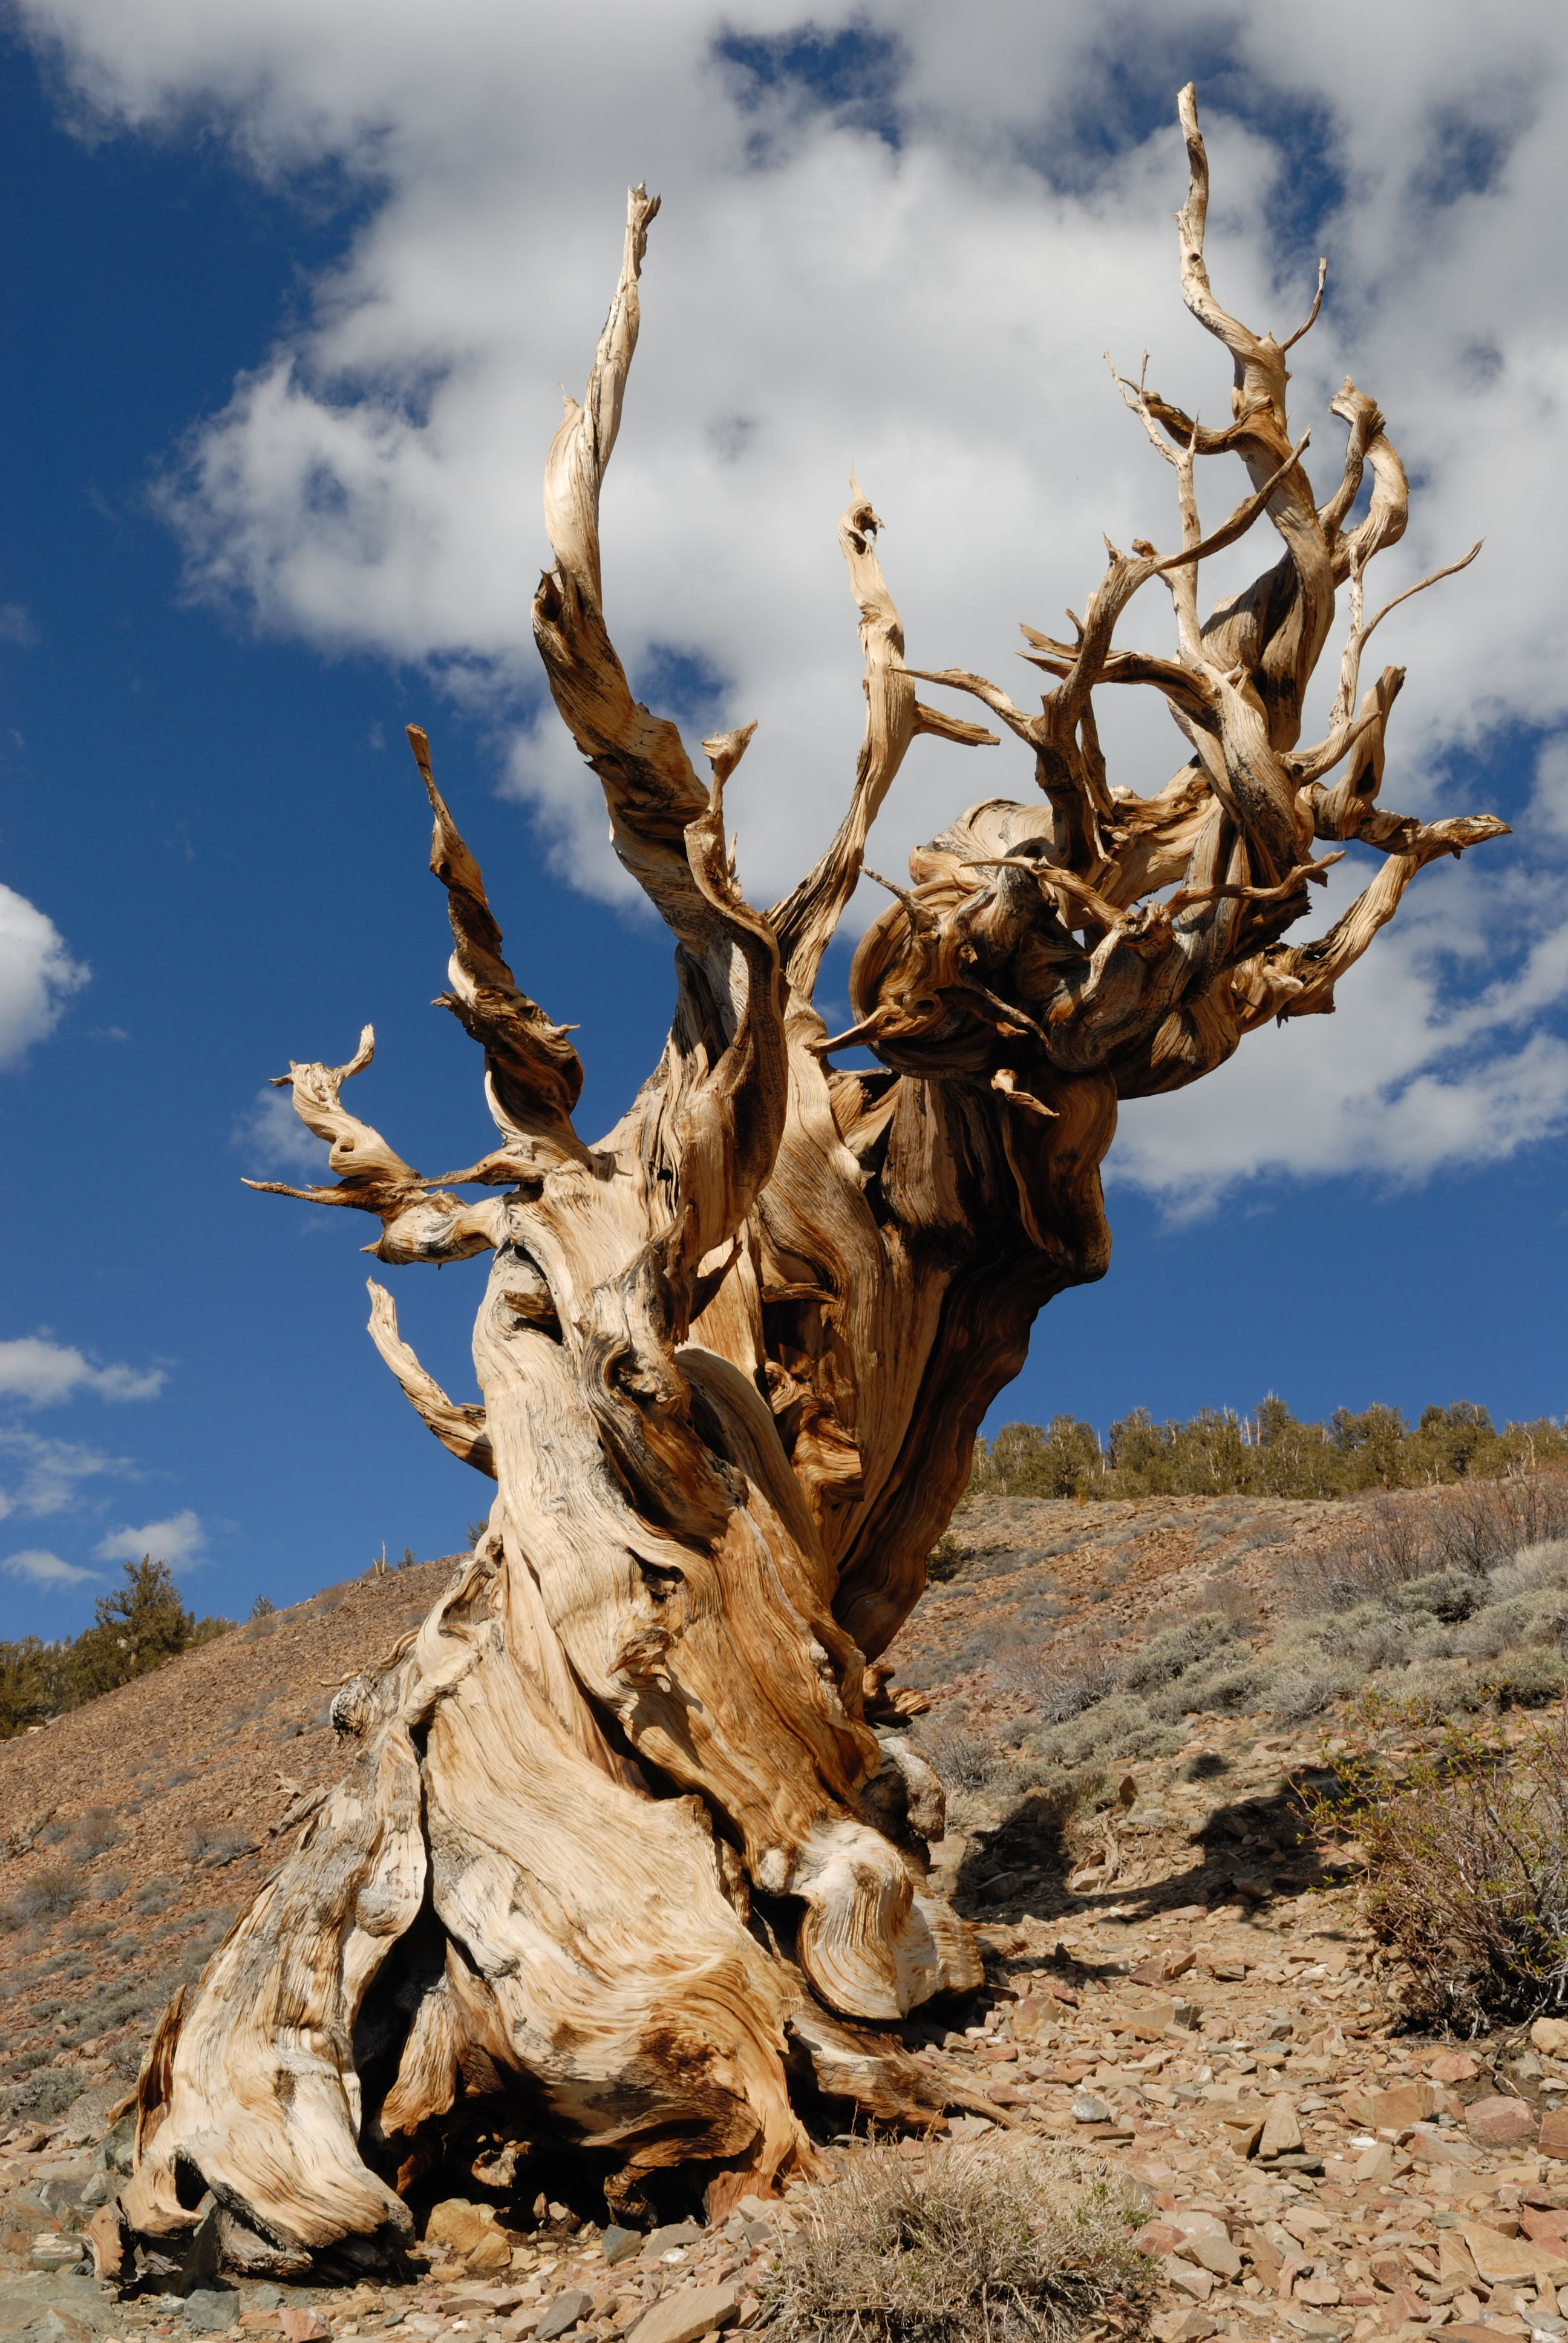 Read My Rings: The Oldest Living Tree Tells All | Collectors Weekly